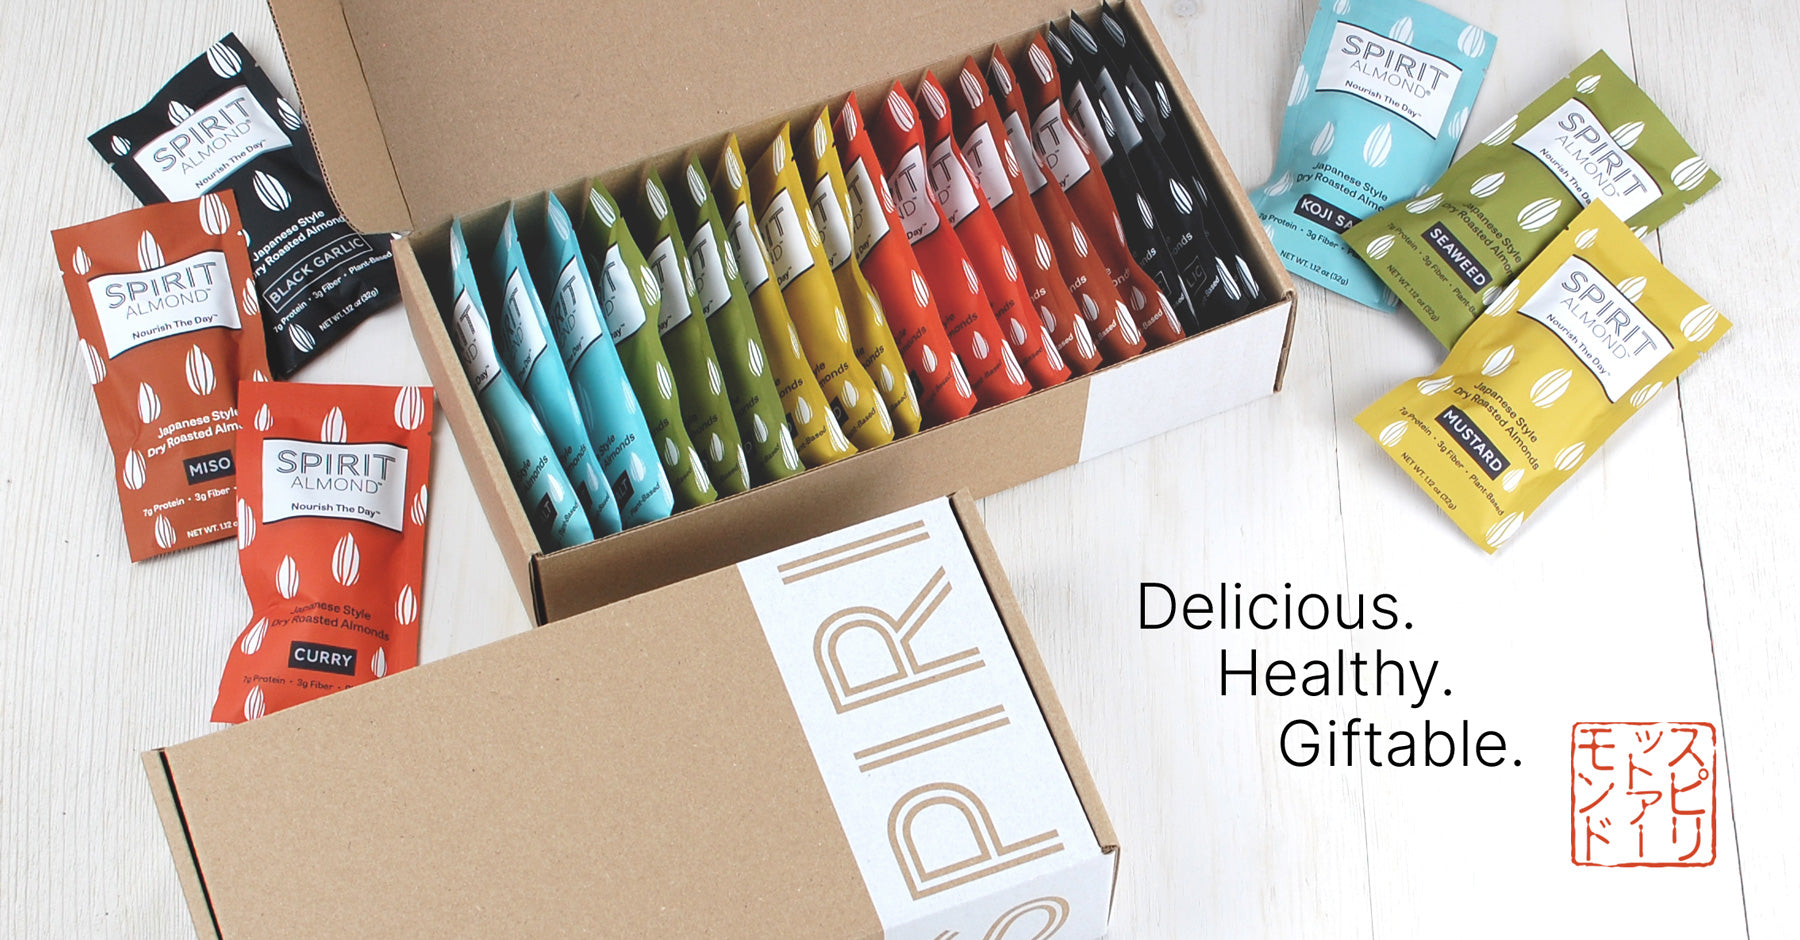 SPIRIT Almond Gift Box, Kraft color, with white band showing SPIRIT logo, Japanese-flavored multi-colored individual packages. Titles: "Delicious, Healthy, Giftable."